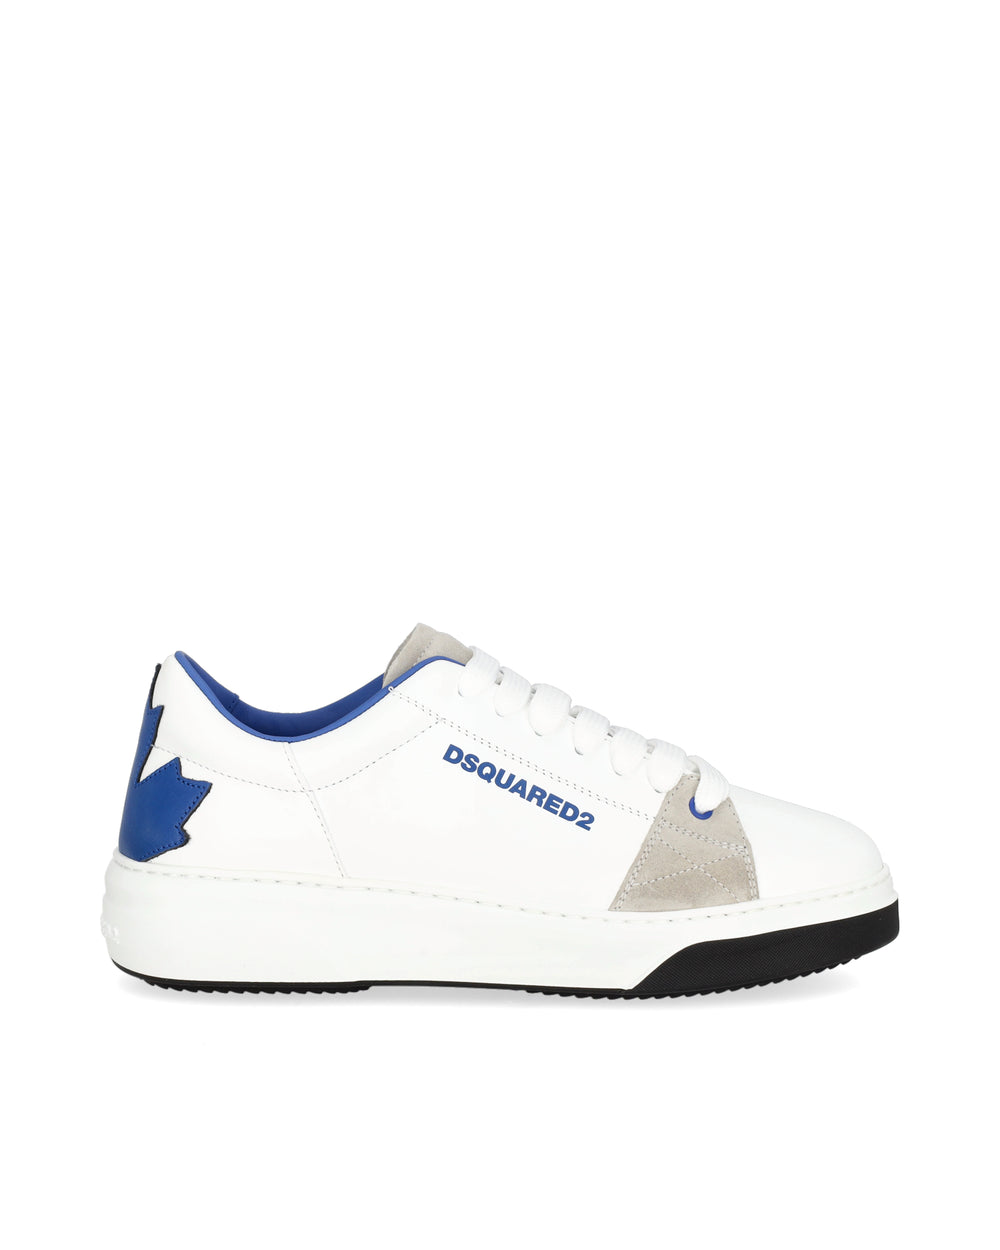 DSQUARED2 | SNEAKERS | SNM017313220001